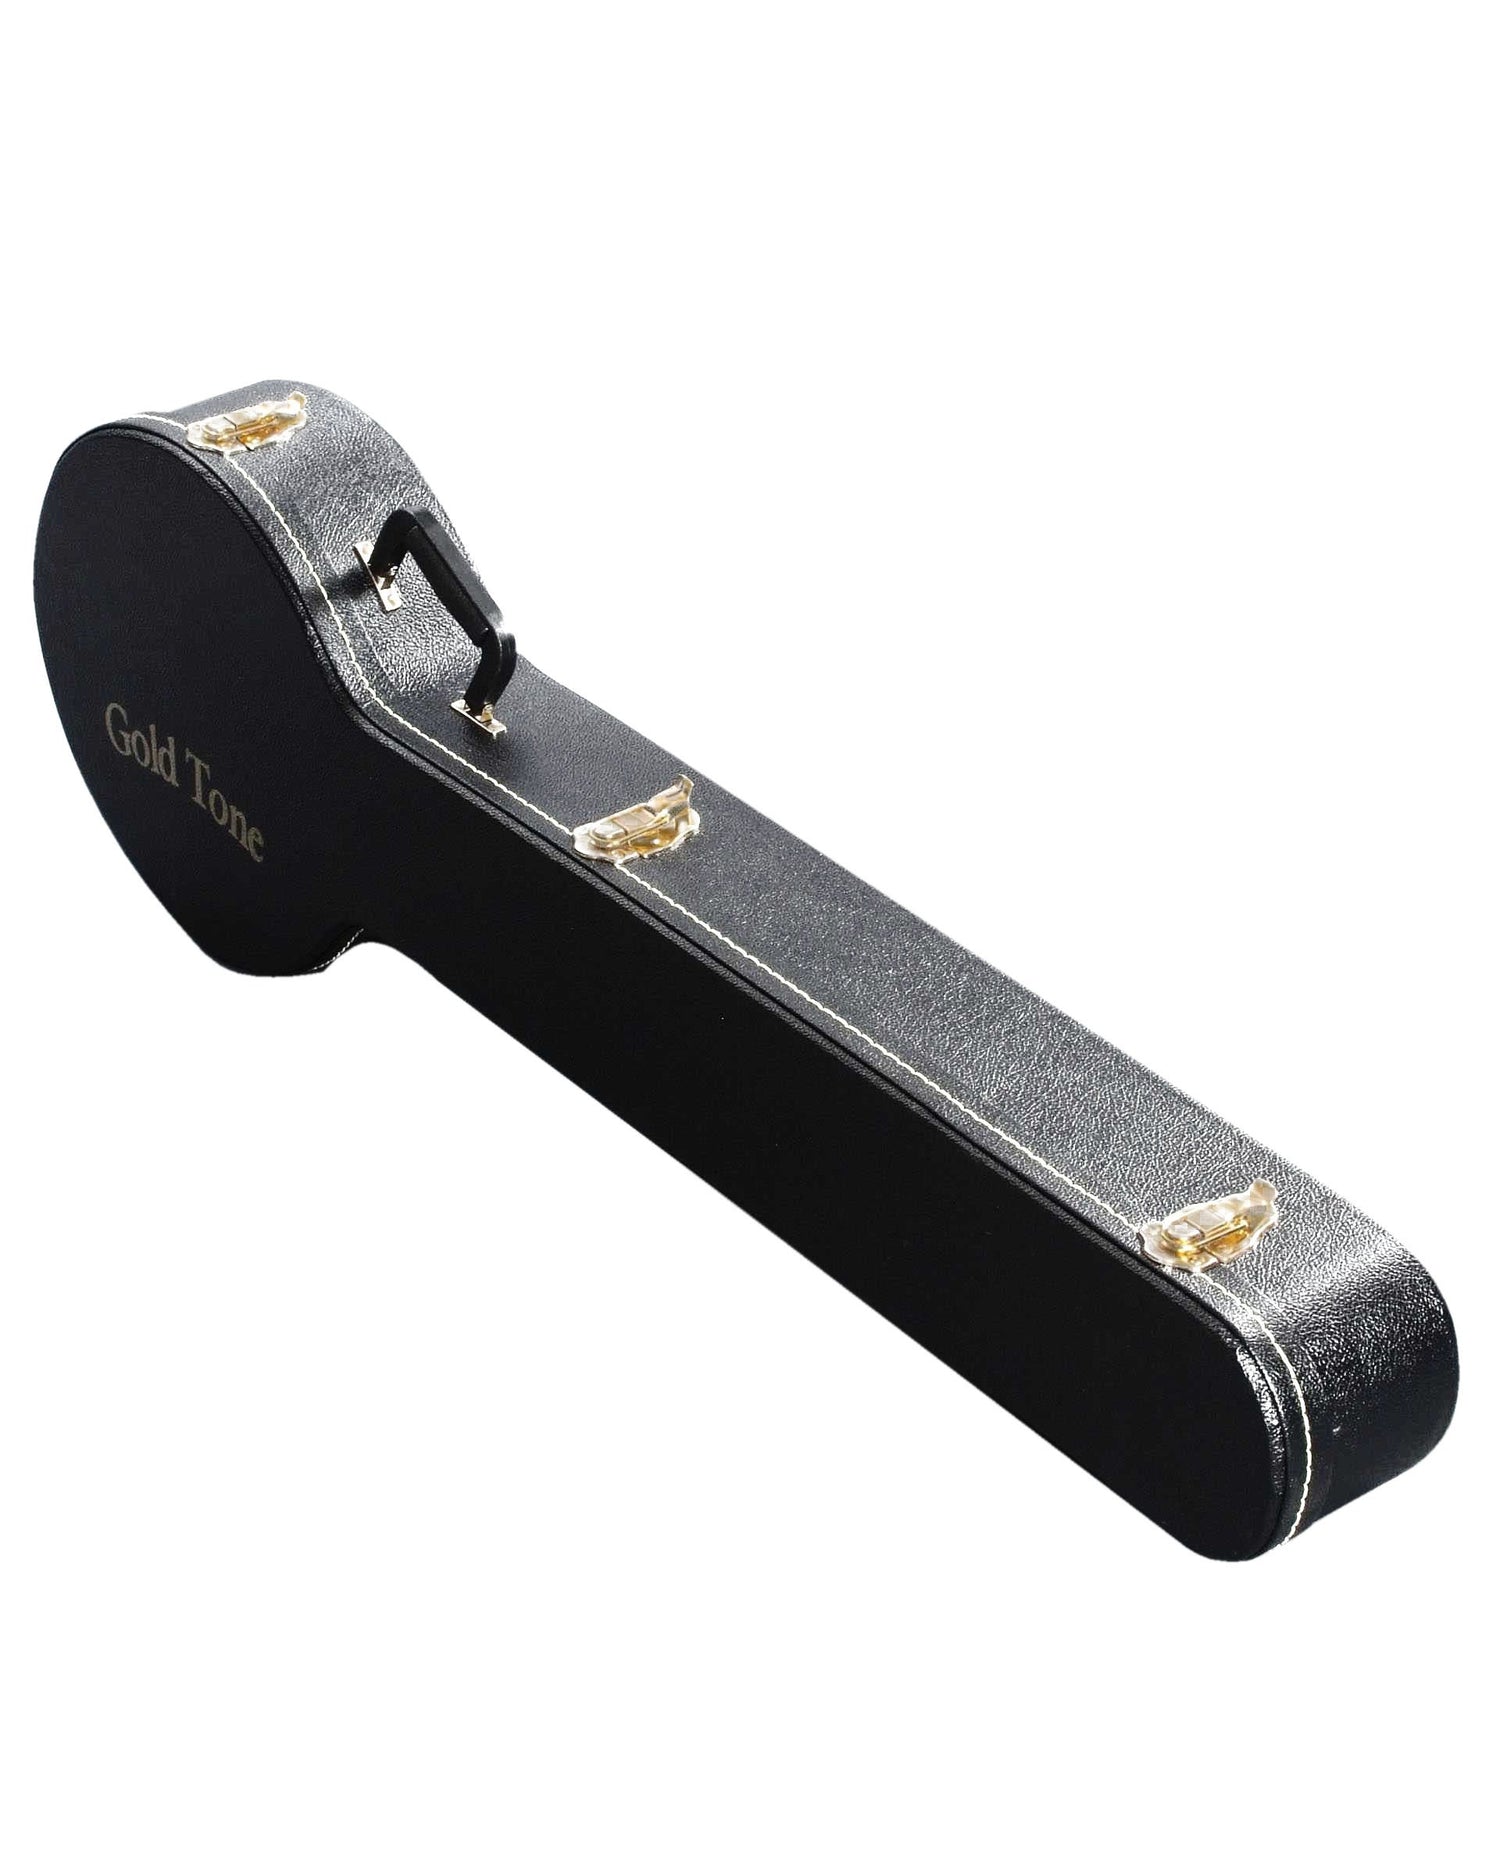 Image 1 of Gold Tone Extra Long Neck Banjo Case,for Openback Banjo - SKU# BCGT-LONGNK : Product Type Accessories & Parts : Elderly Instruments